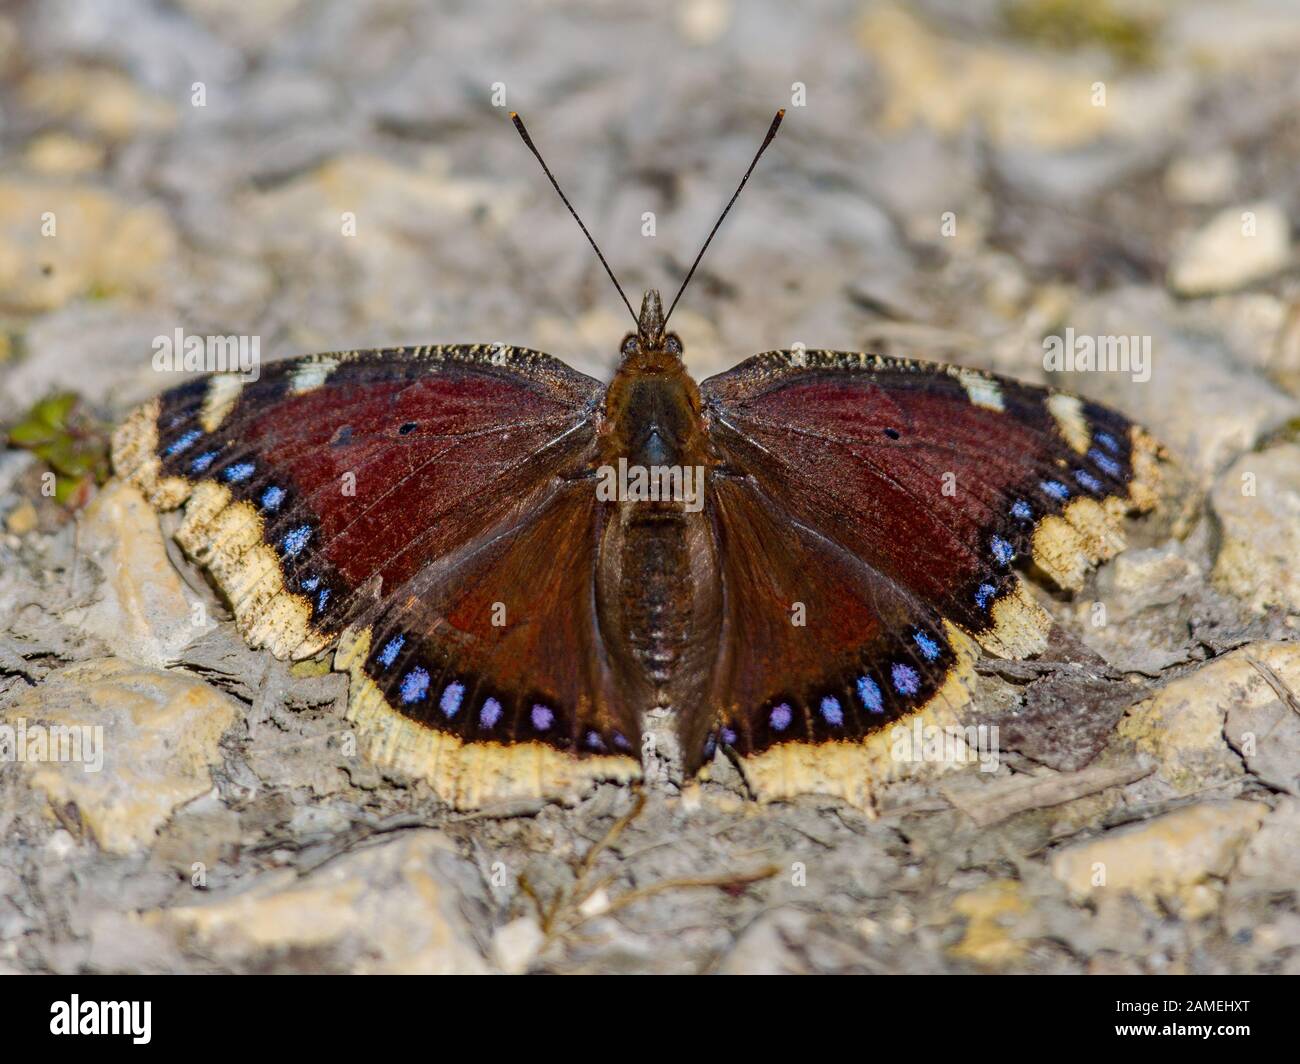 Camberwell beauty butterfly (Nymphalis antiopa) warming in early spring sun after hibernation as imago adult insect. La Brenne, France. Stock Photo